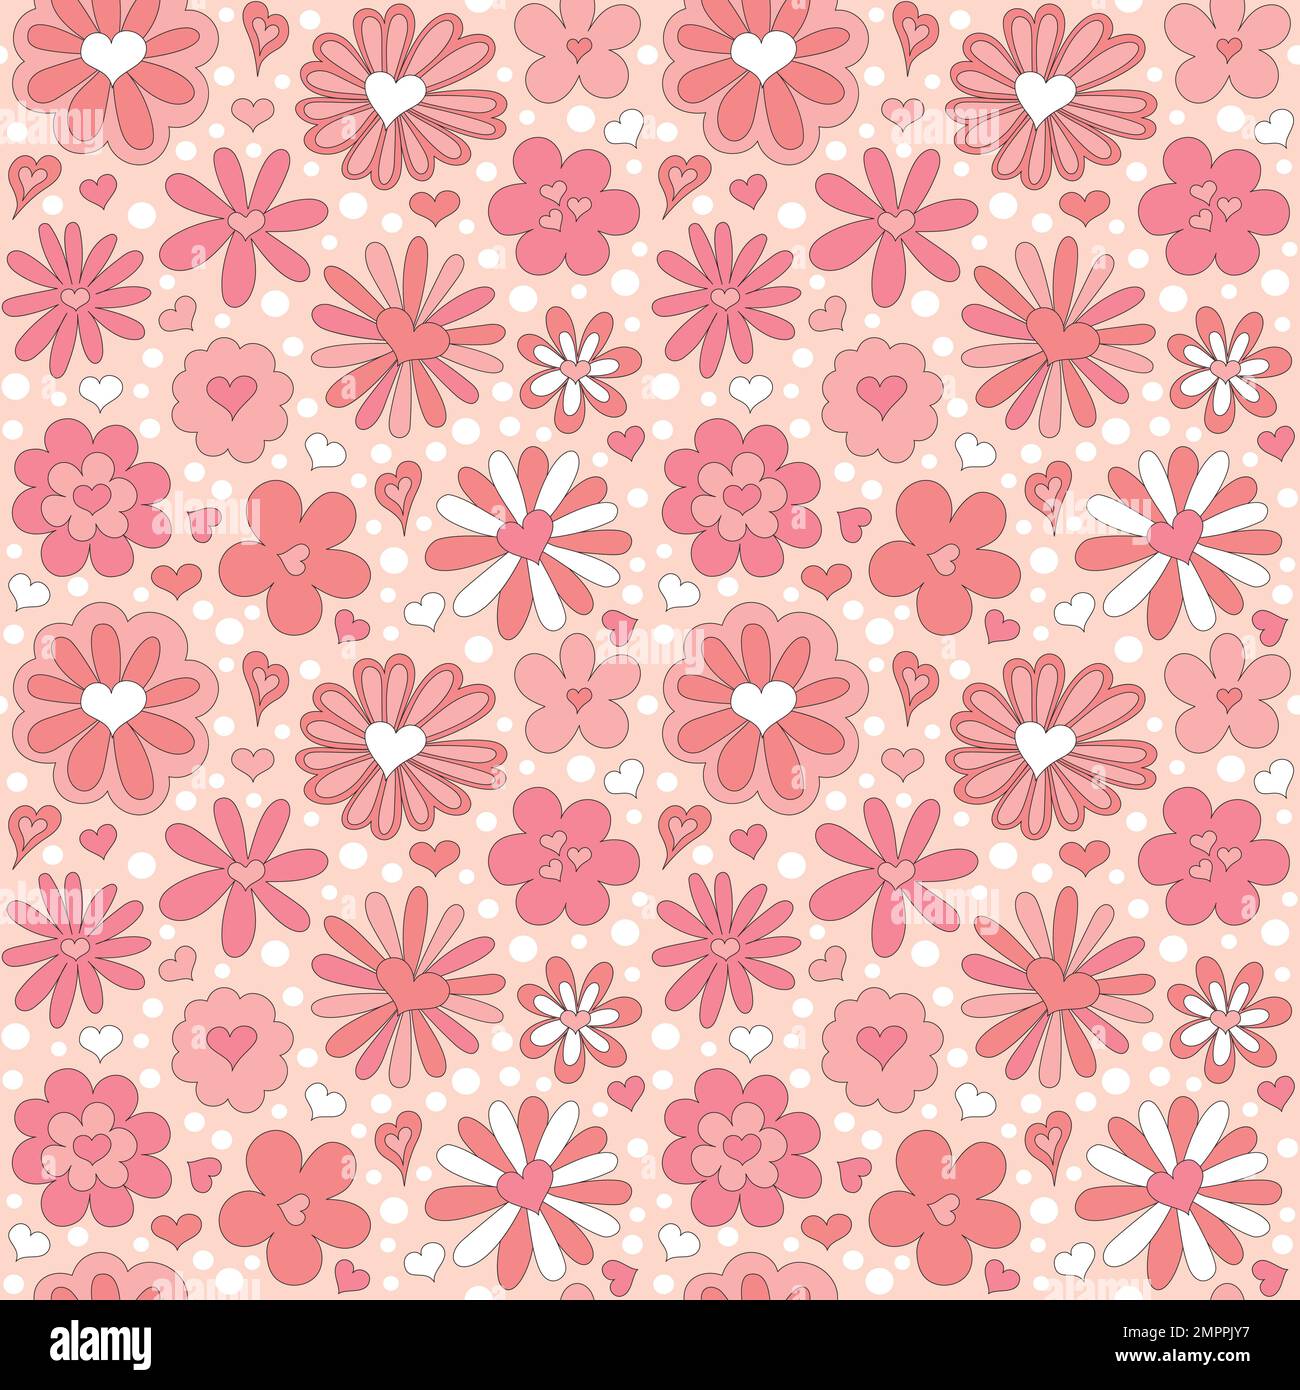 Seamless pattern with retro pink colors hearts. Stock Vector